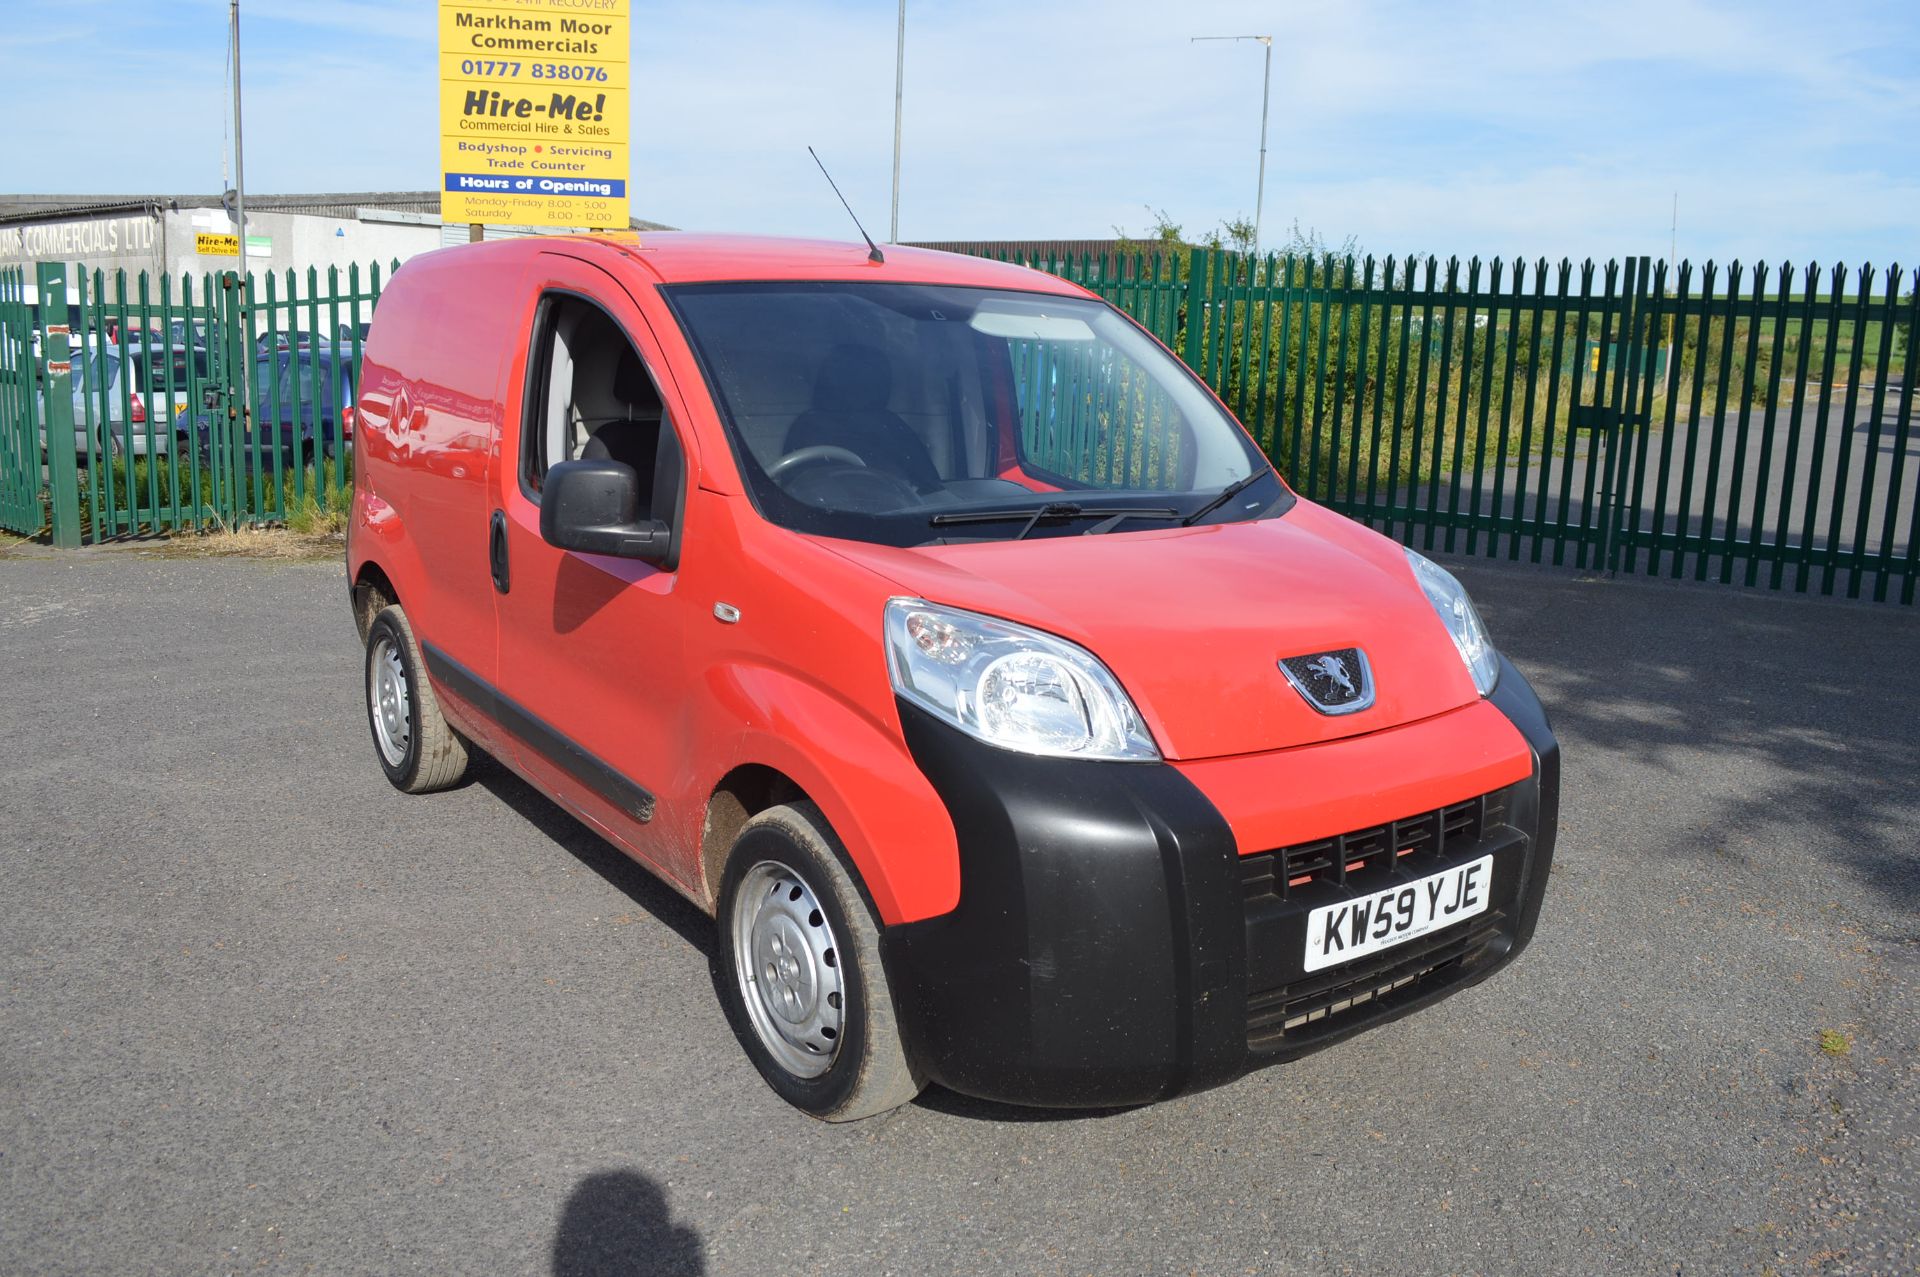 2010/59 REG PEUGEOT BIPPER S HDI - 1 OWNER FROM NEW, ROYAL MAIL *NO VAT*